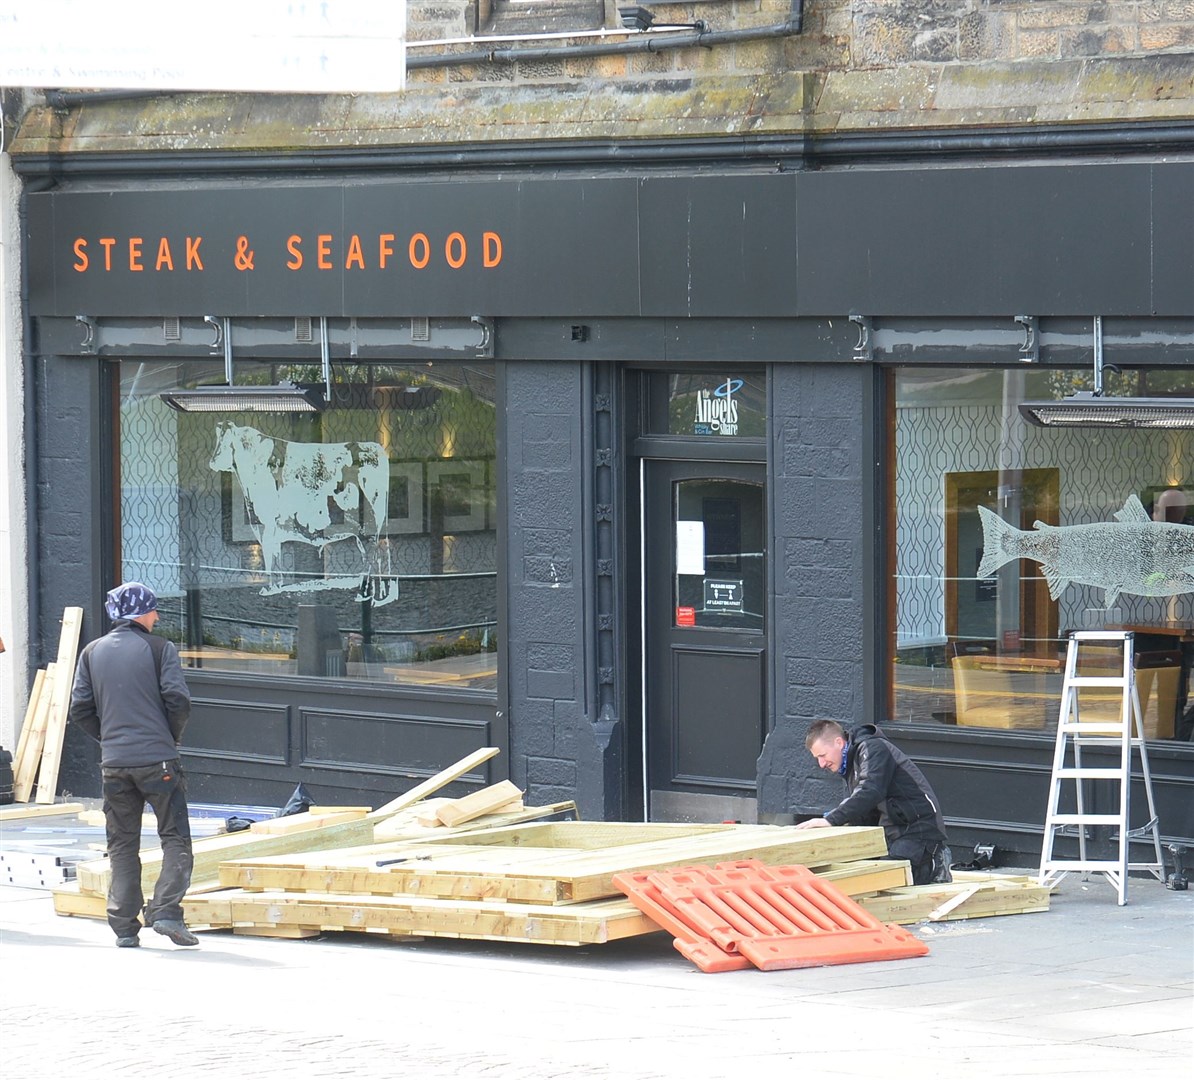 The outdoor seating area at Prime on Ness Walk was dismantled today after going up on Monday.